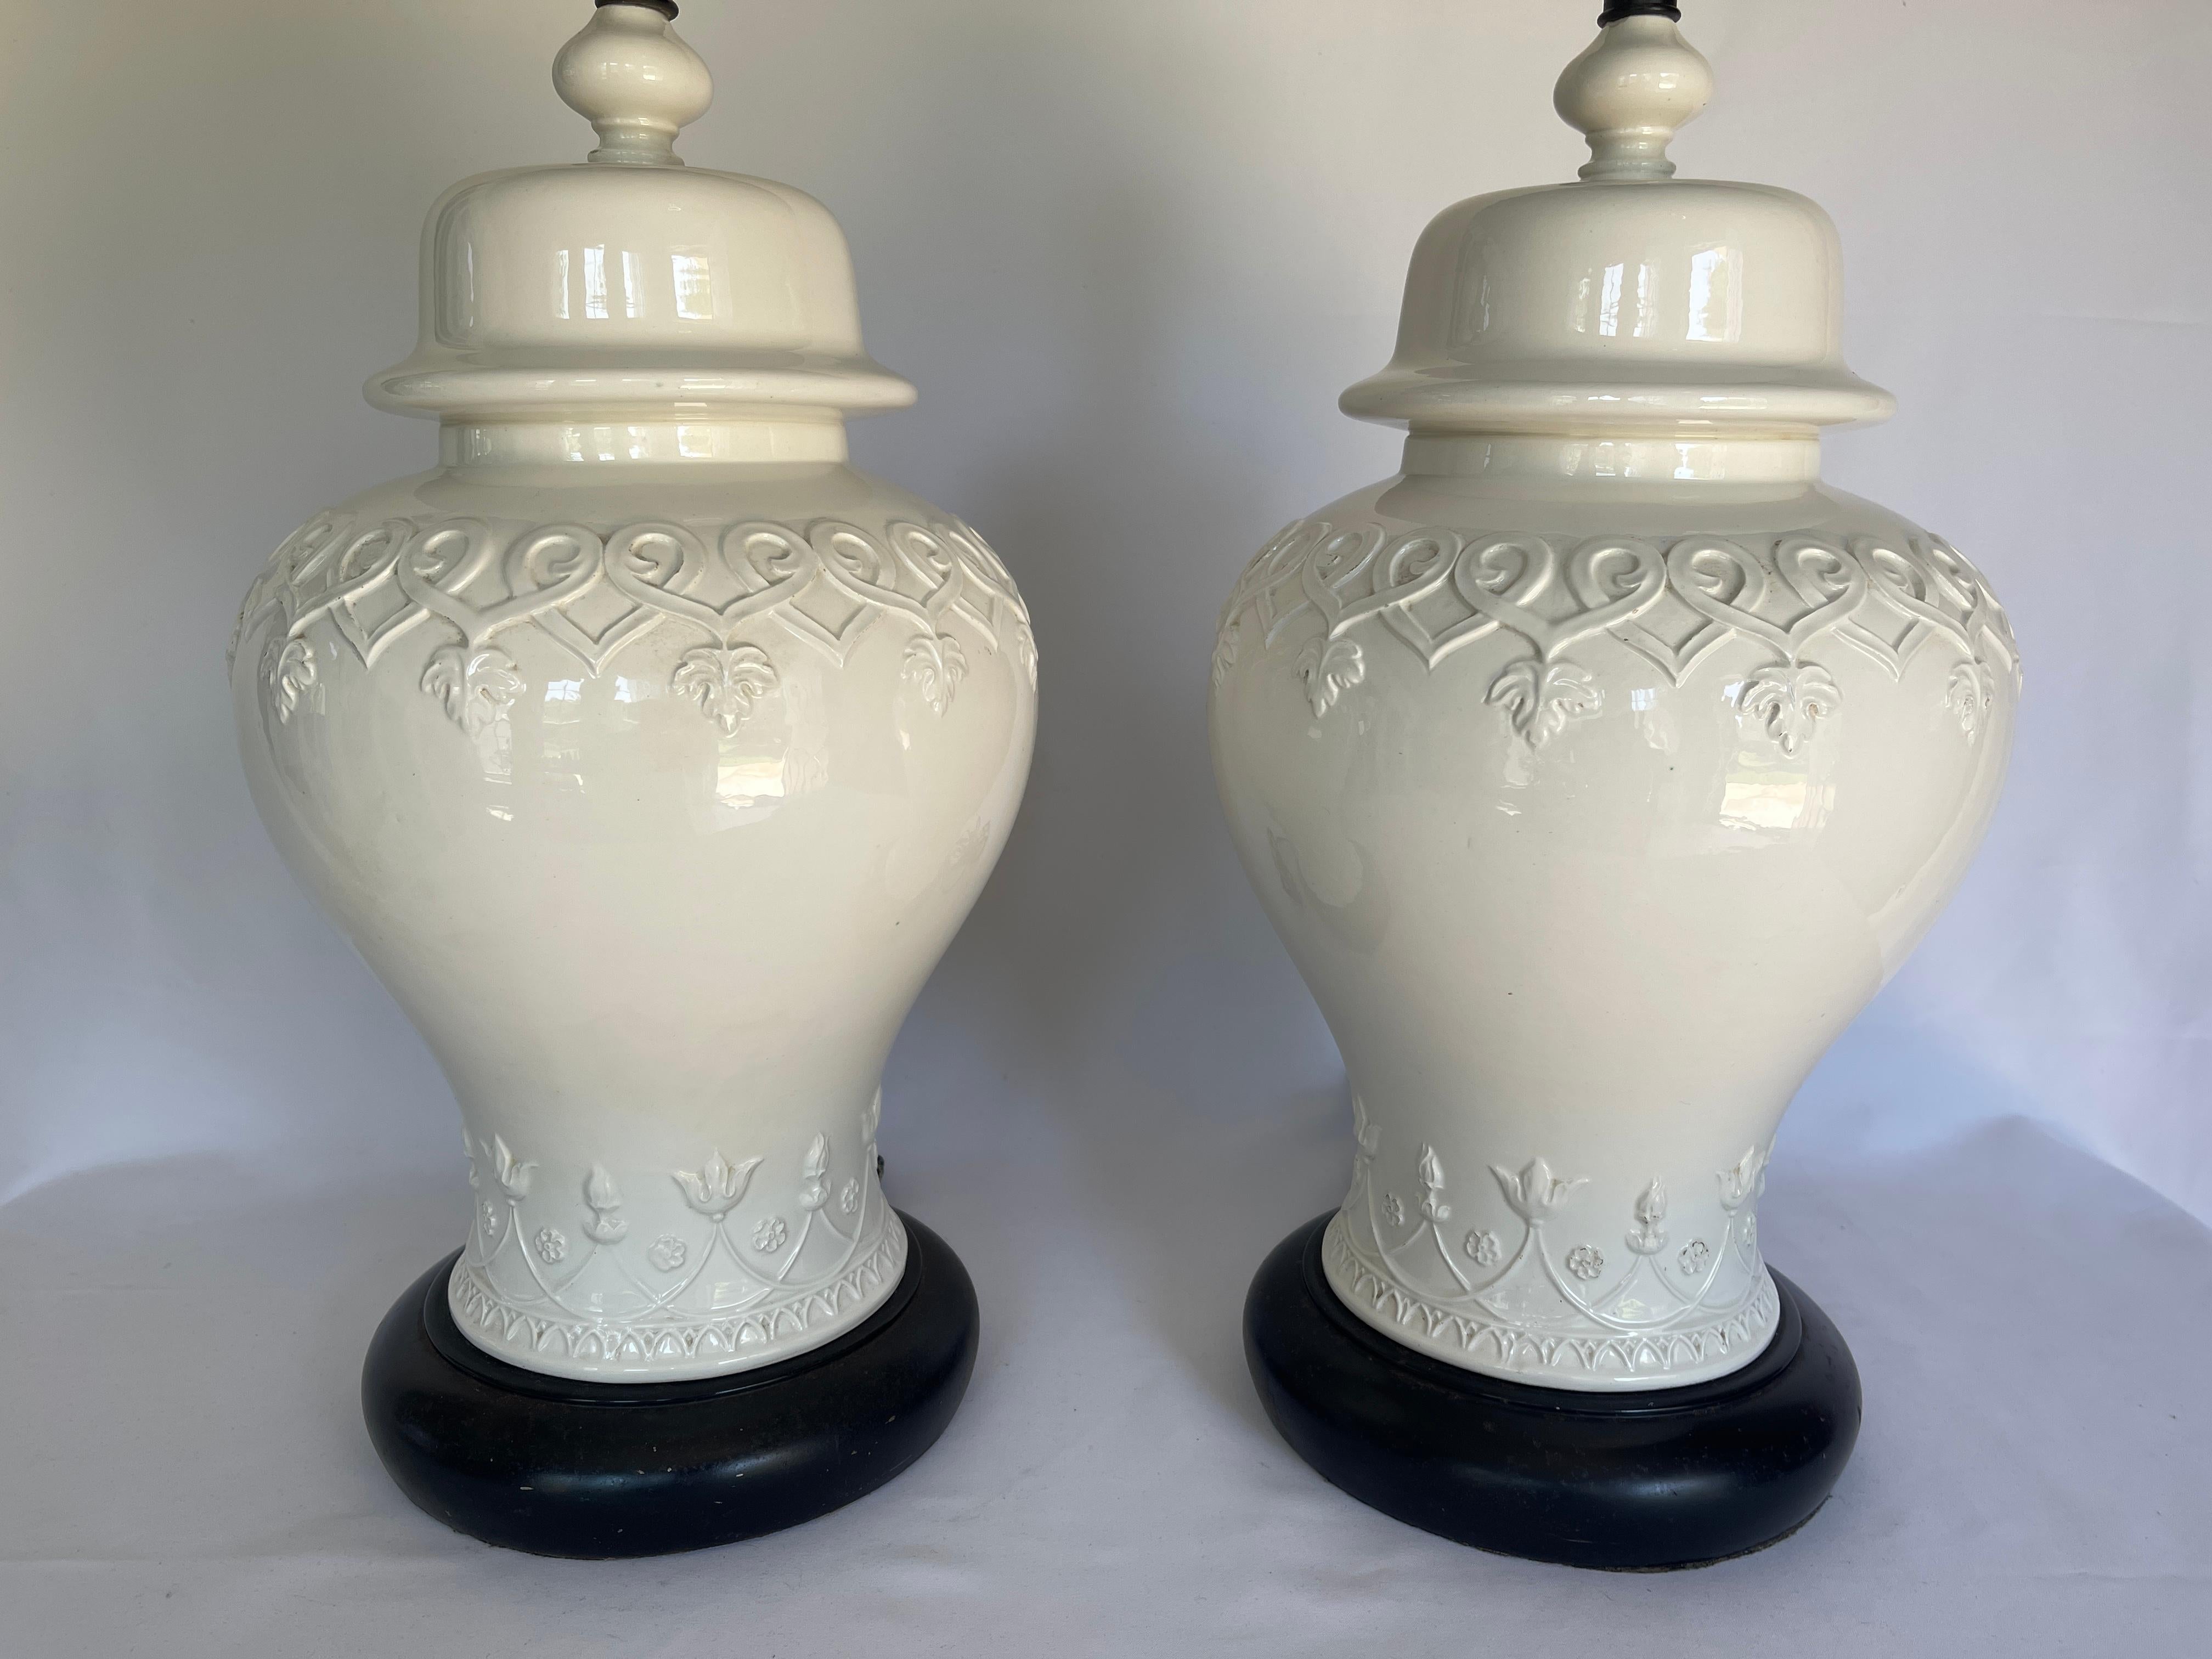 Large pair of Italian ceramic Blanc de Chine ginger jar lamps with white on white relief design all around. Black circular bases, have some finish loss.
Original solid brass acorn finials included.
Chinoiserie lamp body measures 19